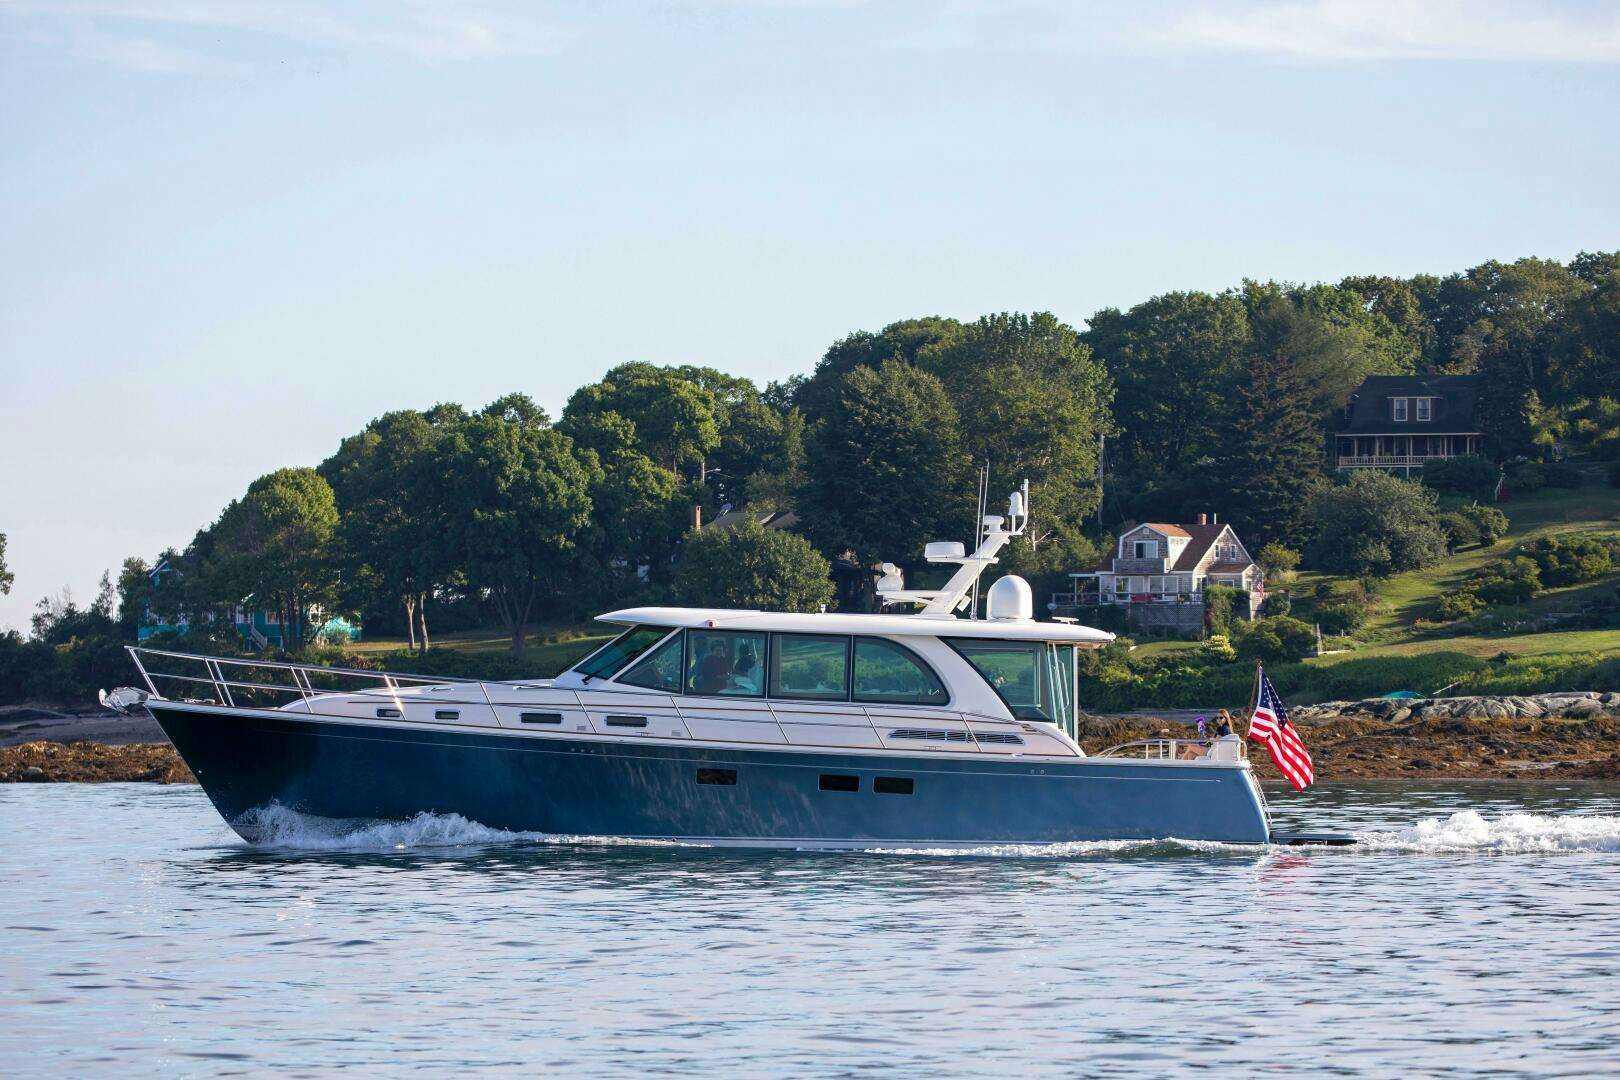 Sand crab
Yacht for Sale